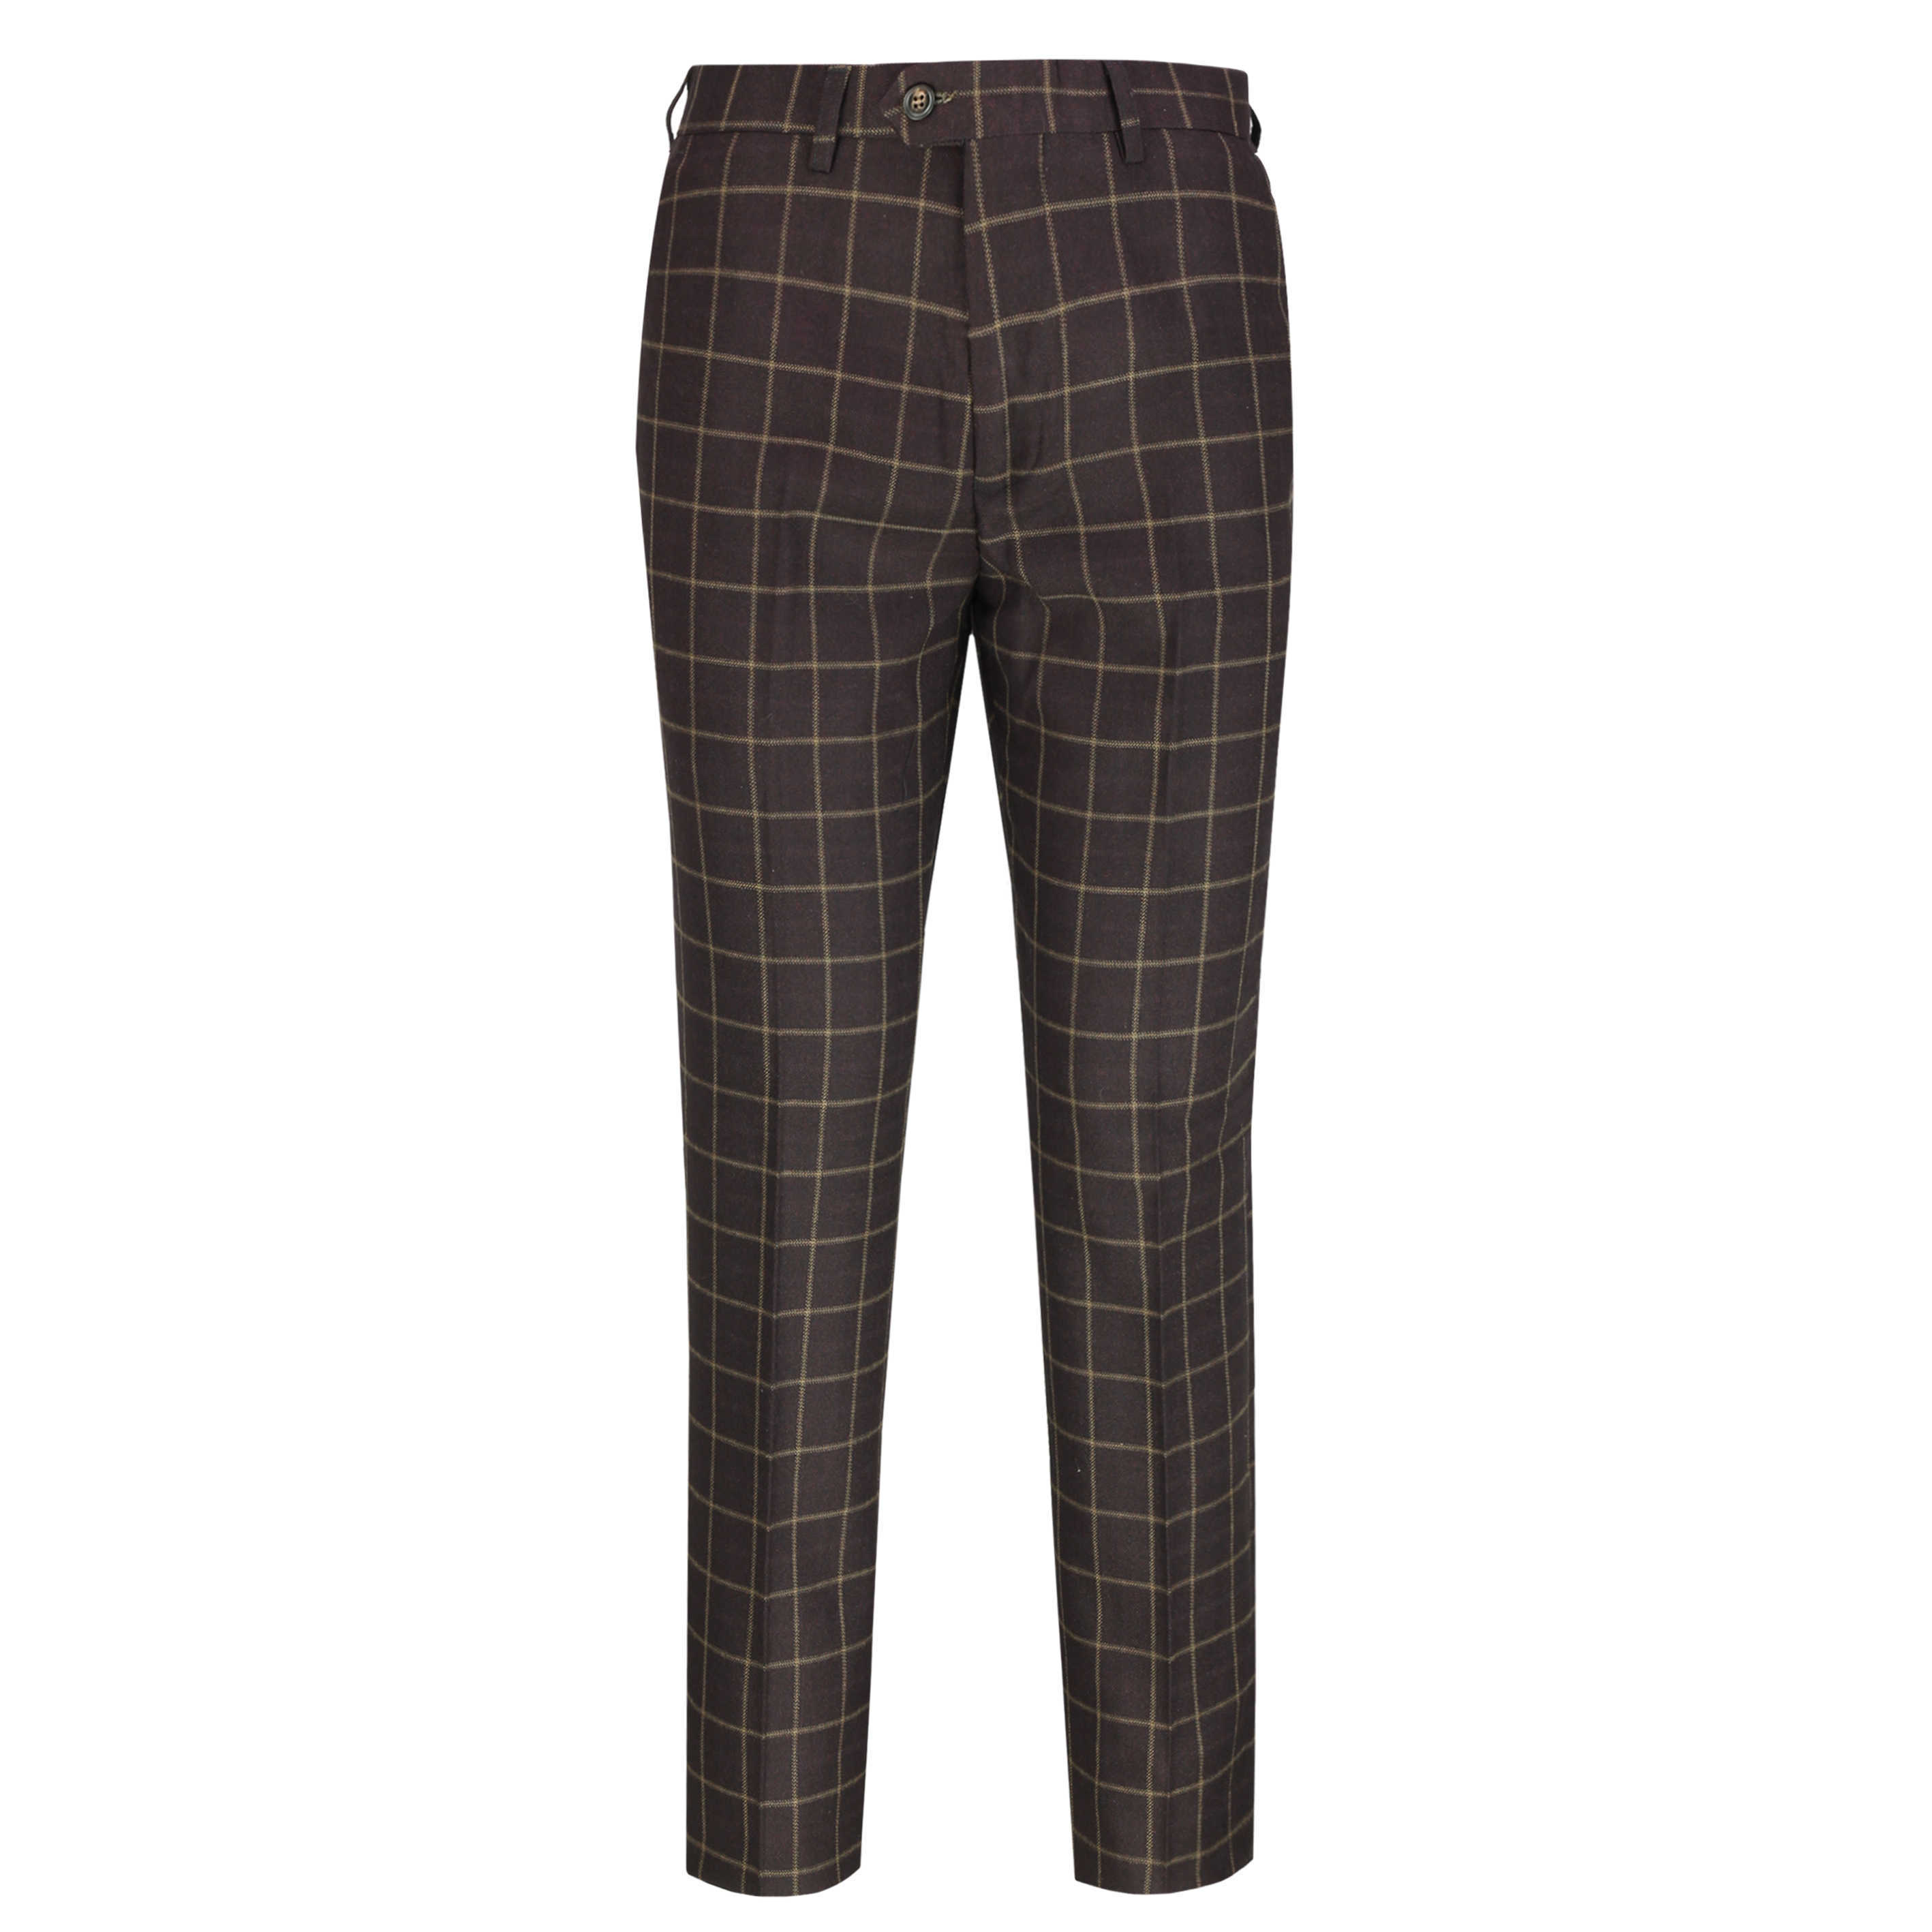 Mens Brown Windowpane Check Trousers Retro Vintage Slim Tailored Fit ...